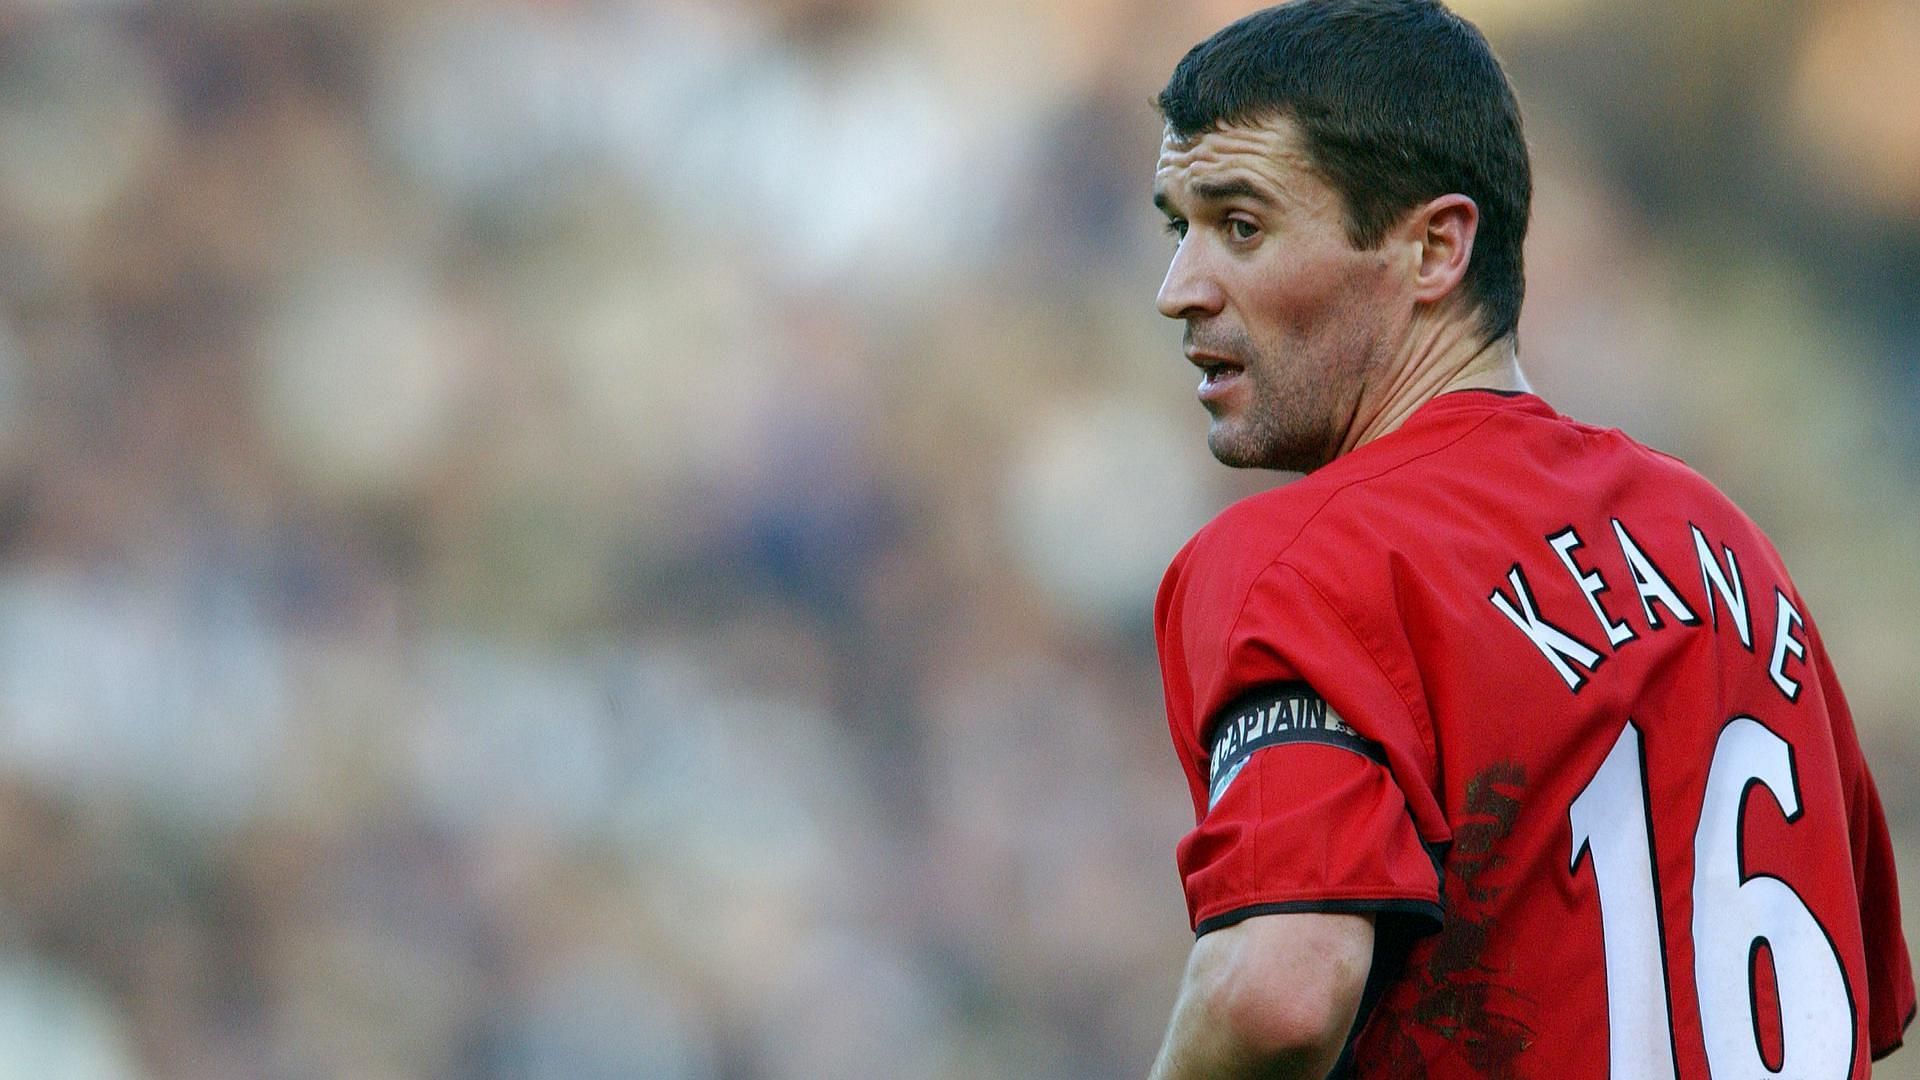 Roy Keane was the perfect Manchester United captain Steven Gerrard was the embodiment of Liverpool Football Club